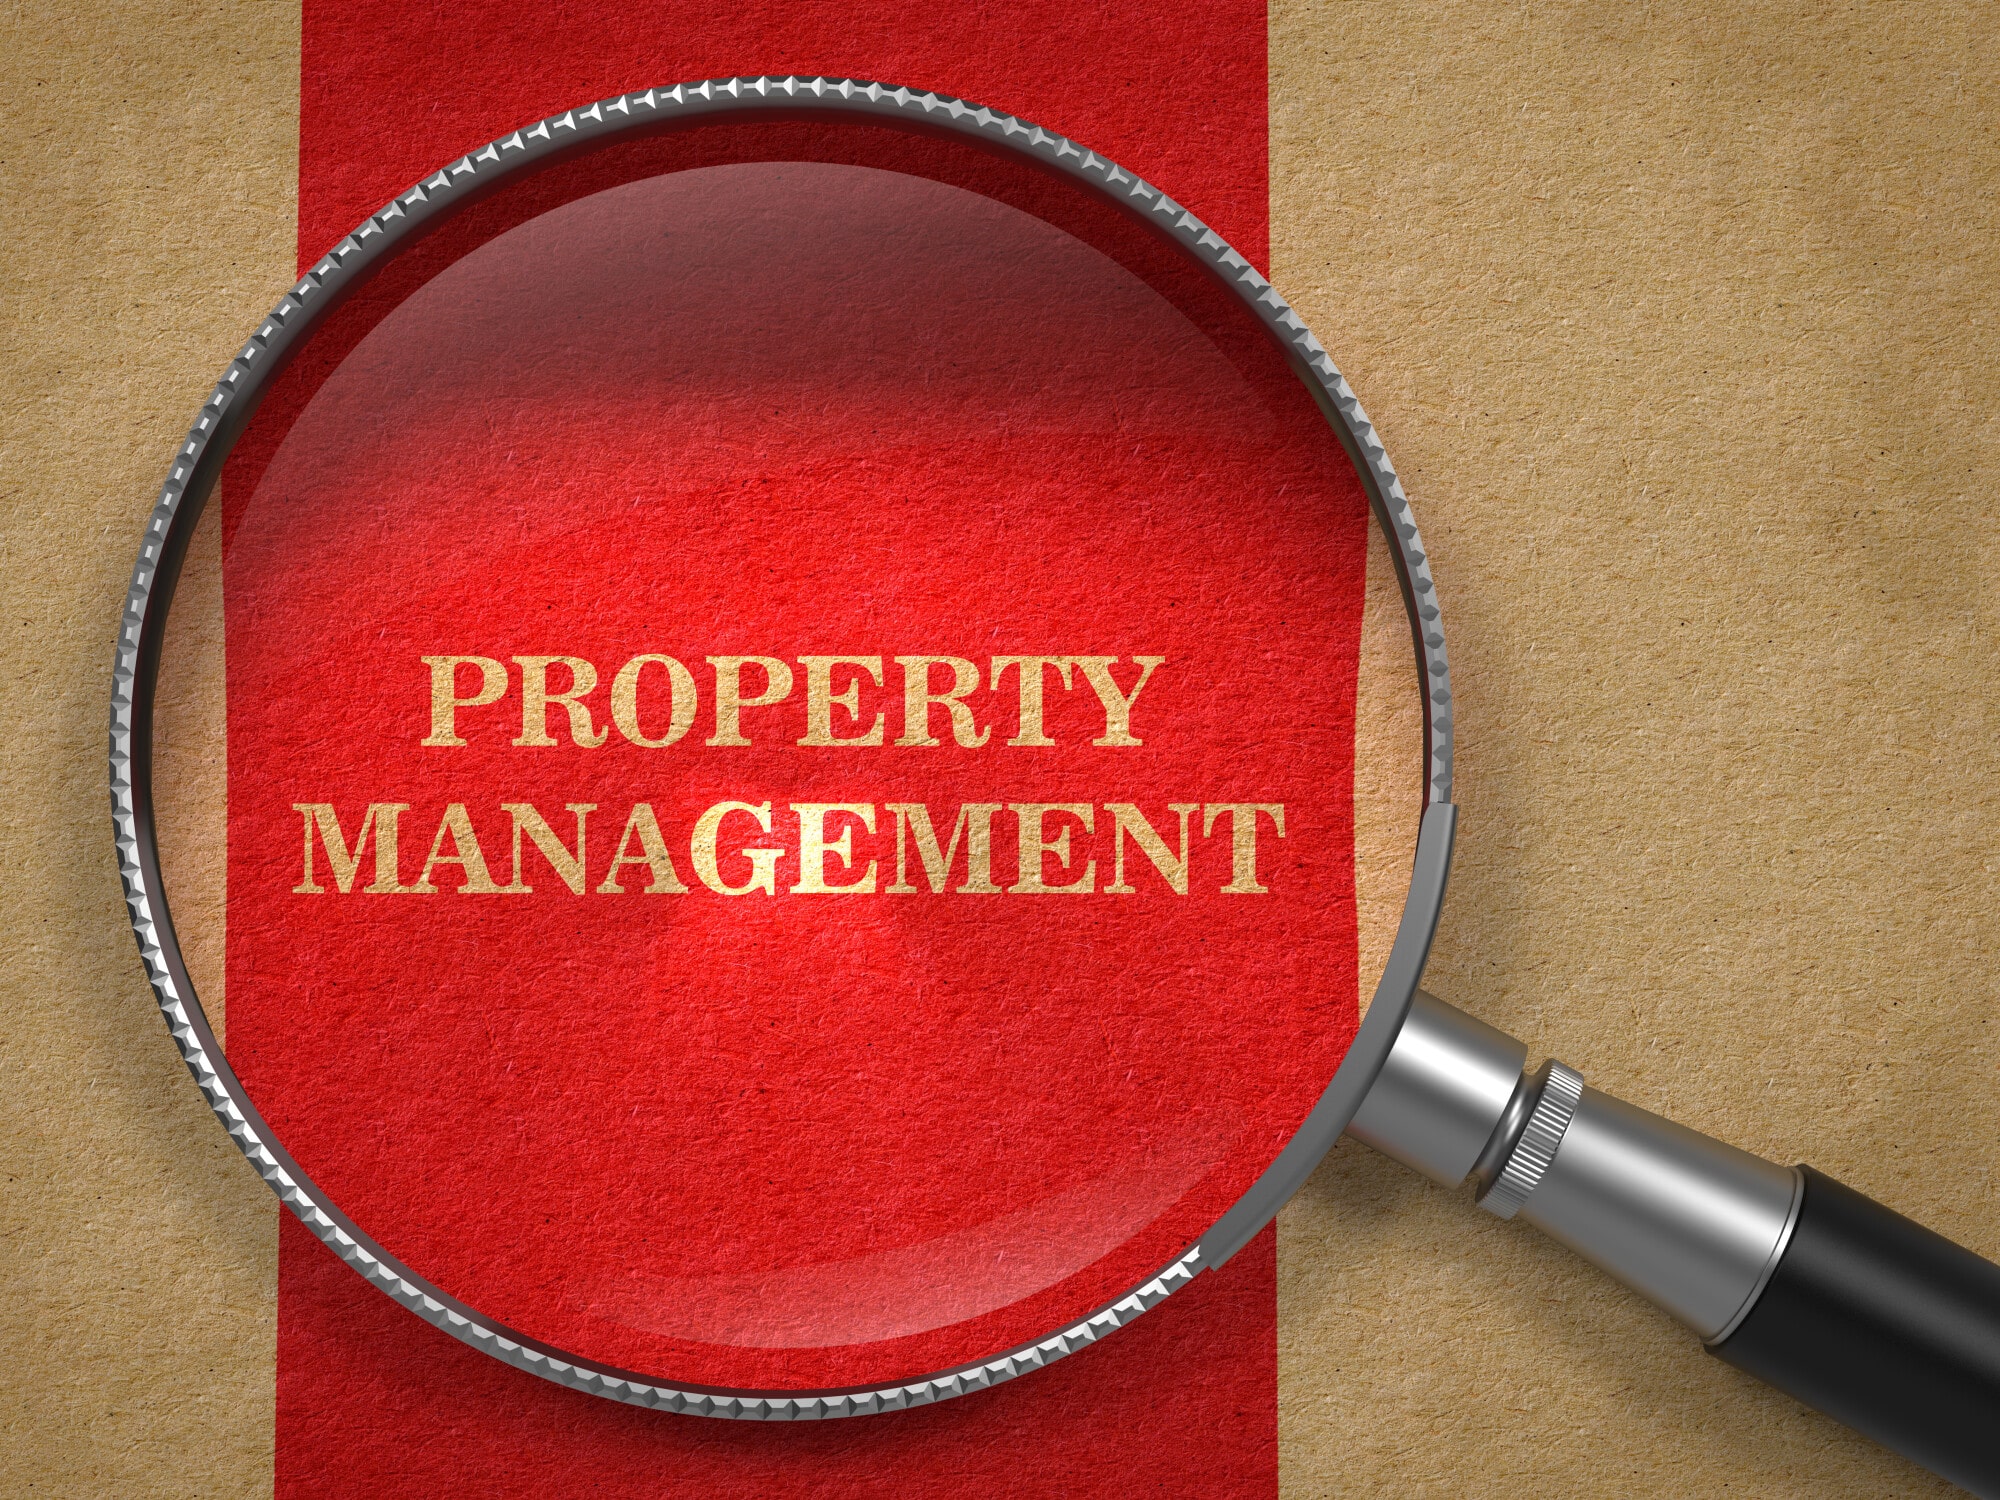 Common Property Management Mistakes That You Should Avoid